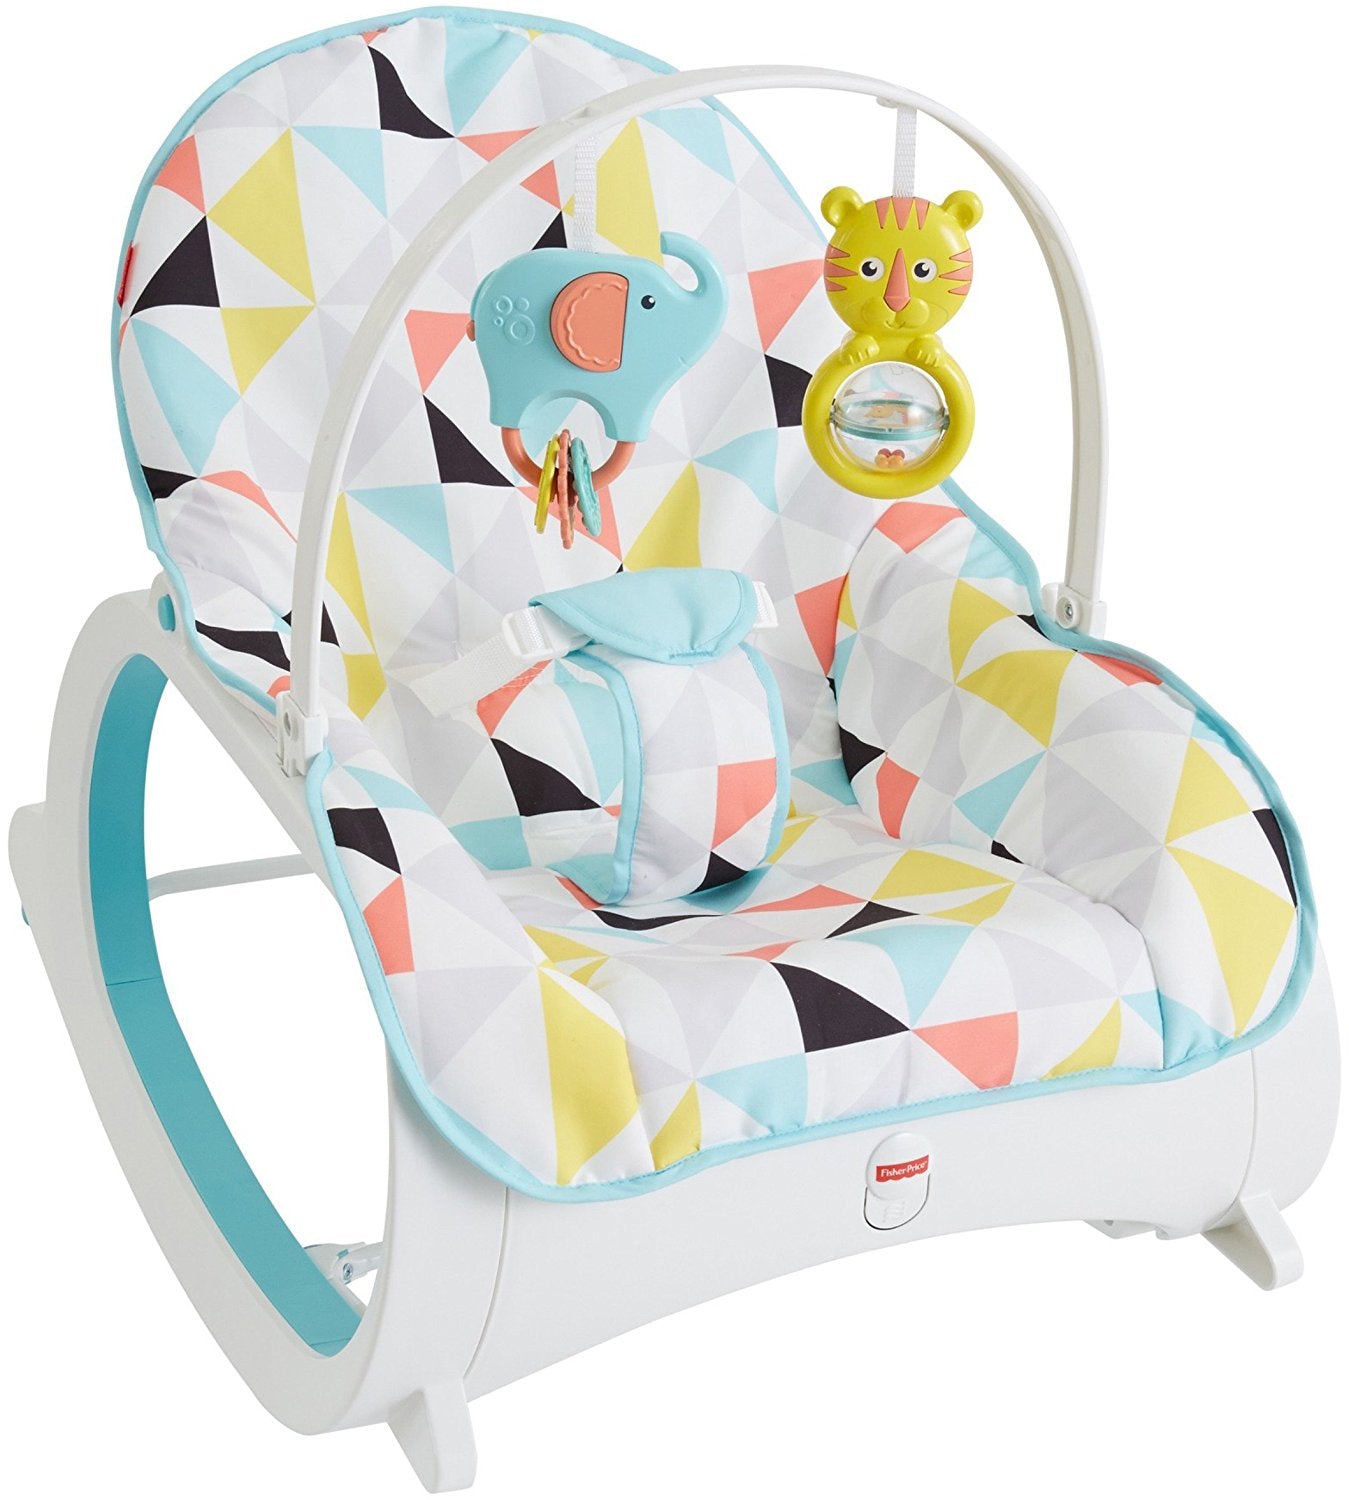 Fisher PriceInfant-To-Toddler Rocker - Windmill, Gender Neutral FDP04